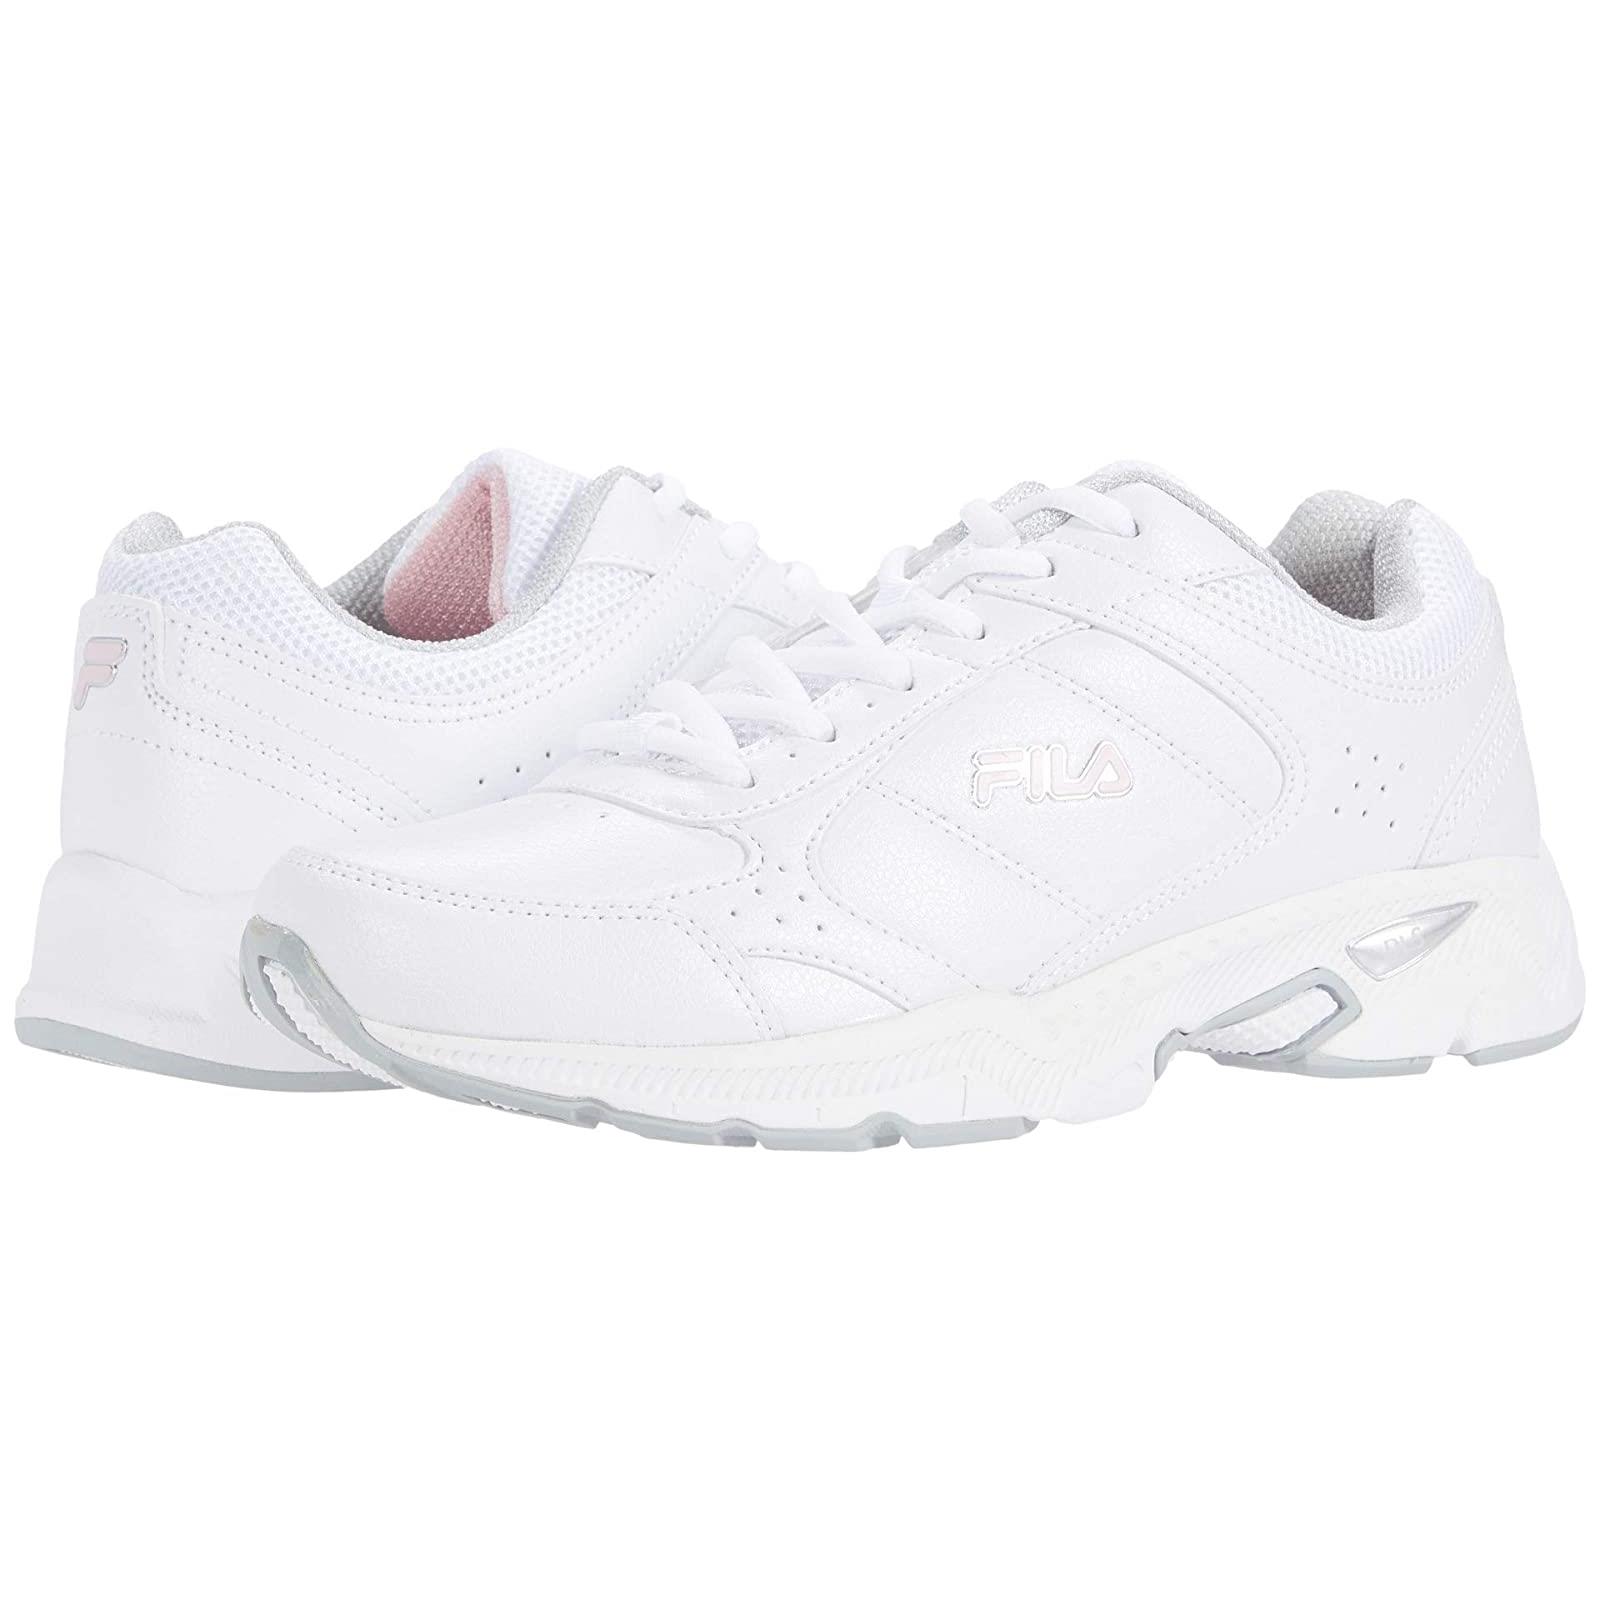 Woman`s Sneakers Athletic Shoes Fila Memory Valant 5 White/Pink/Metallic Silver